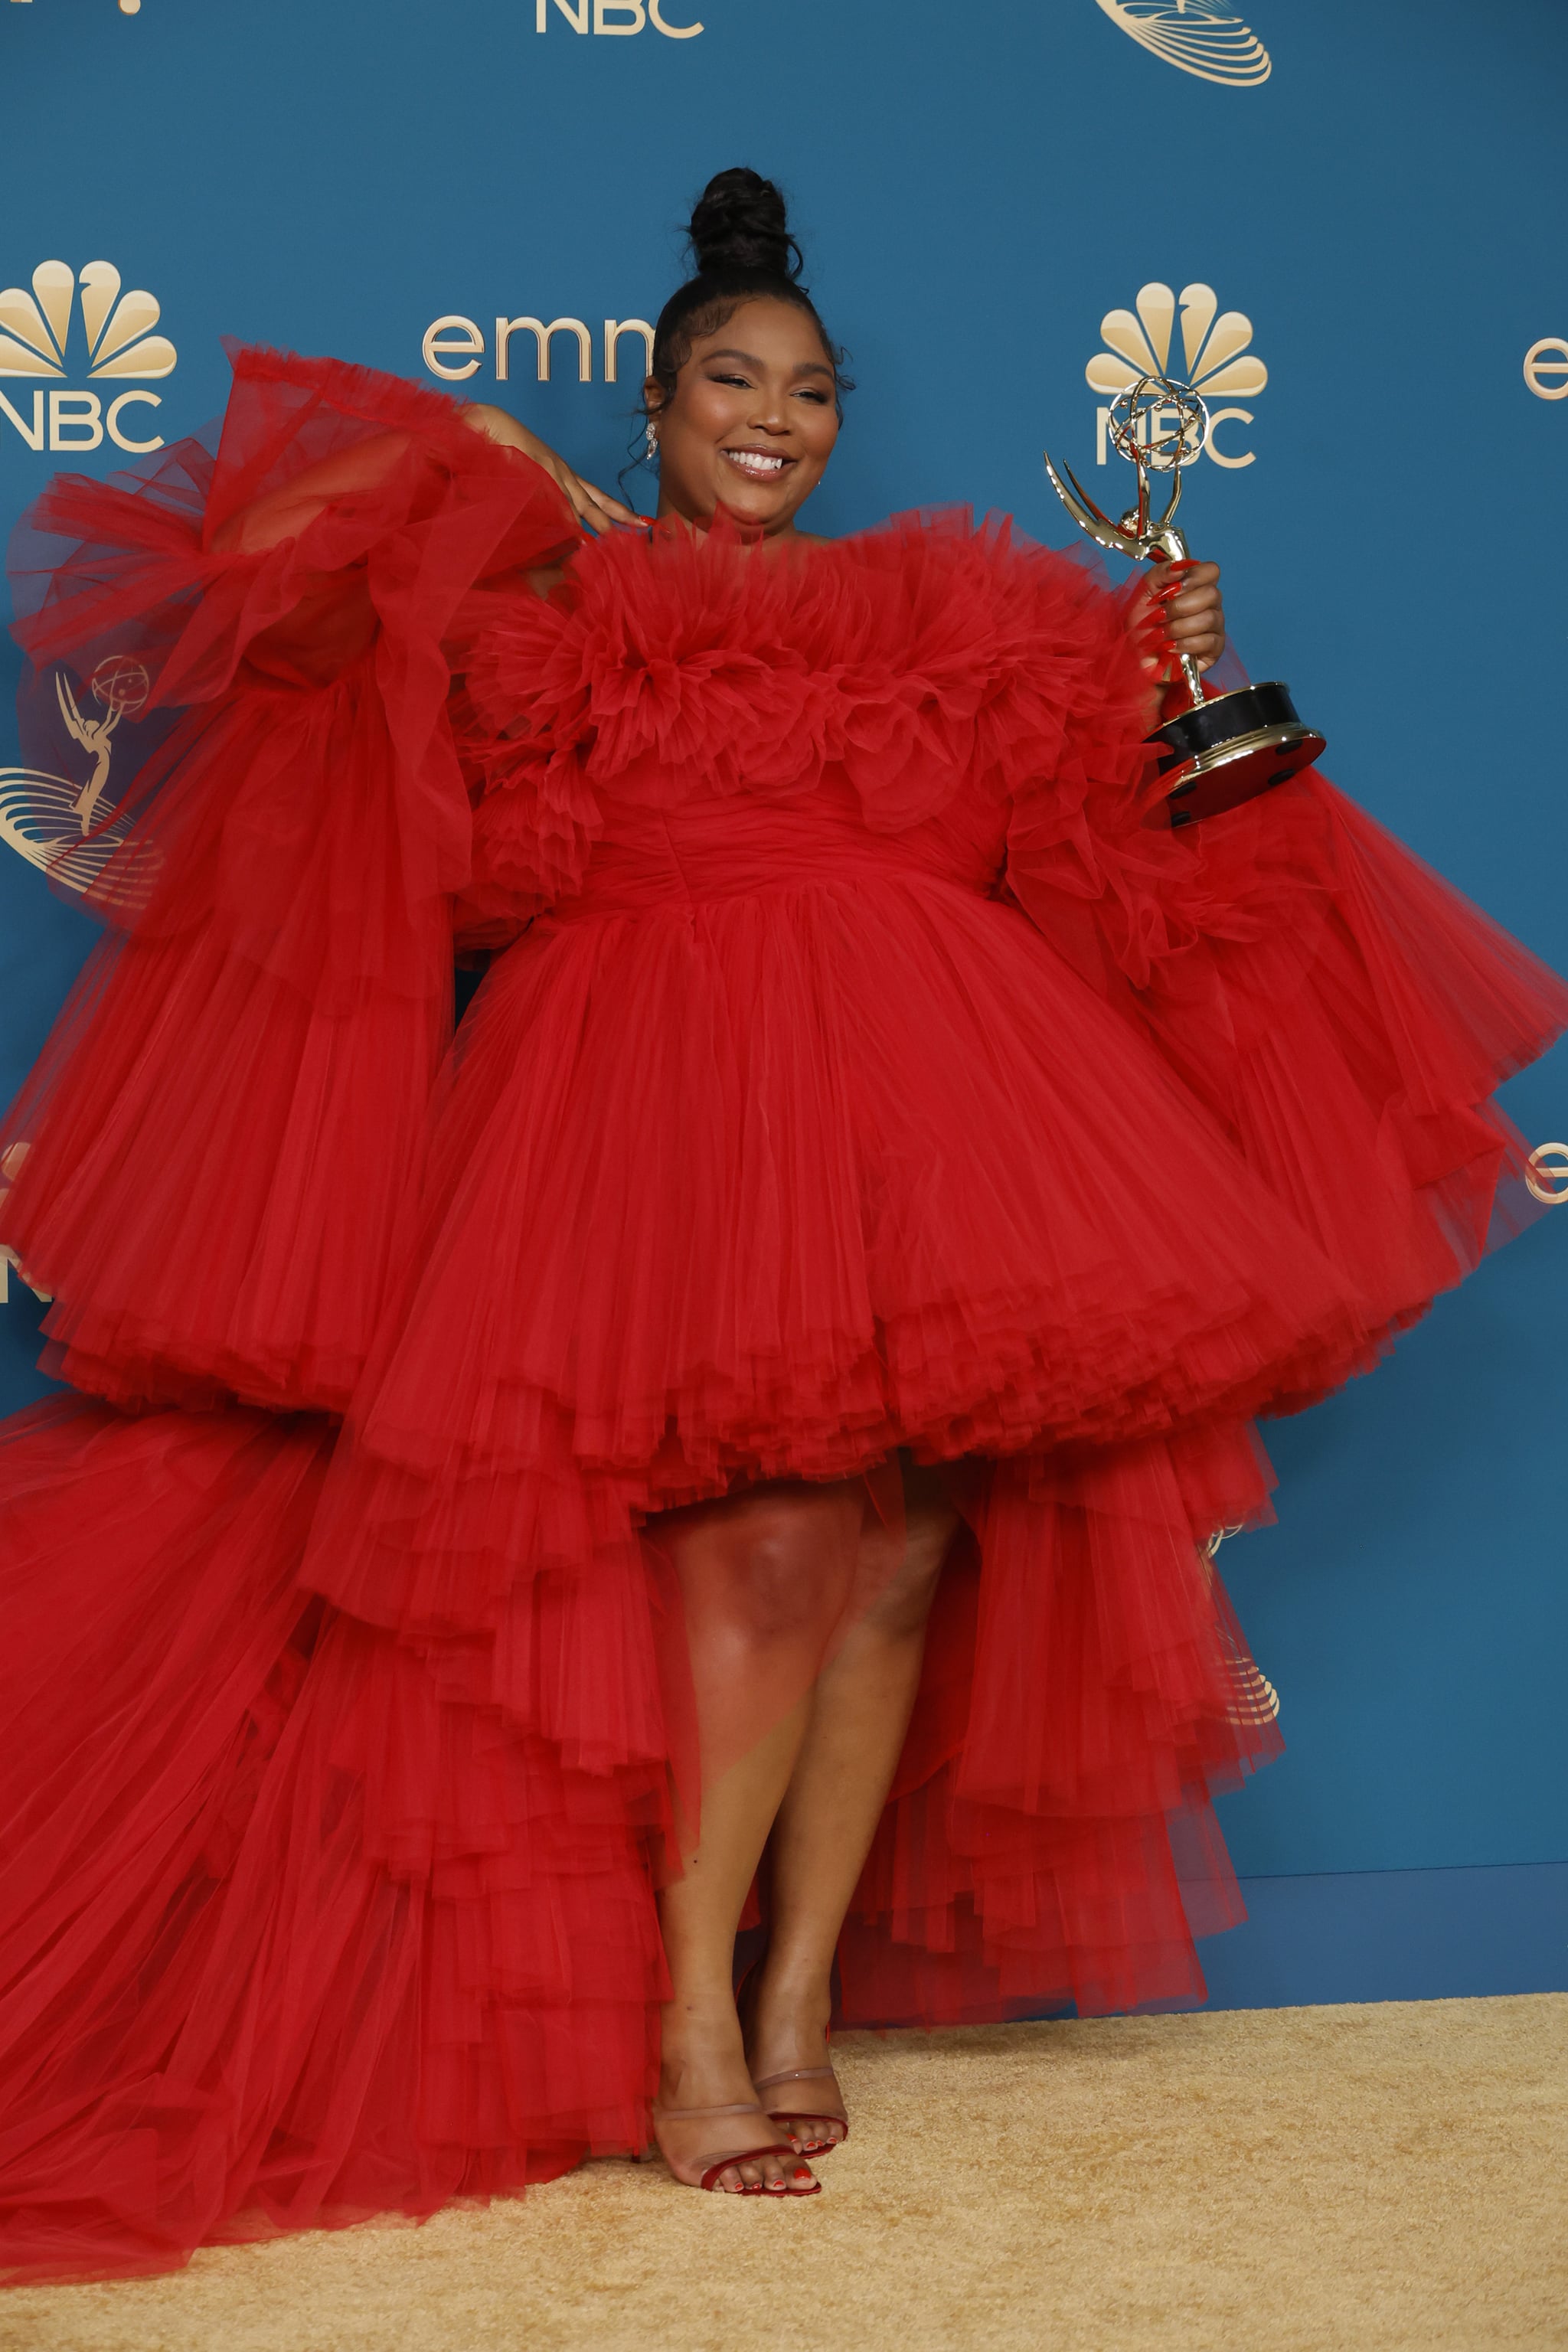 LOS ANGELES, CALIFORNIA - SEPTEMBER 12: Lizzo, winner of the Outstanding Competition Program award for 'Lizzo's Watch Out for the Big Grrrls,' poses in the press room during the 74th Primetime Emmys at Microsoft Theatre on September 12, 2022 in Los Angeles, California. (Photo by Frazer Harrison/Getty Images)